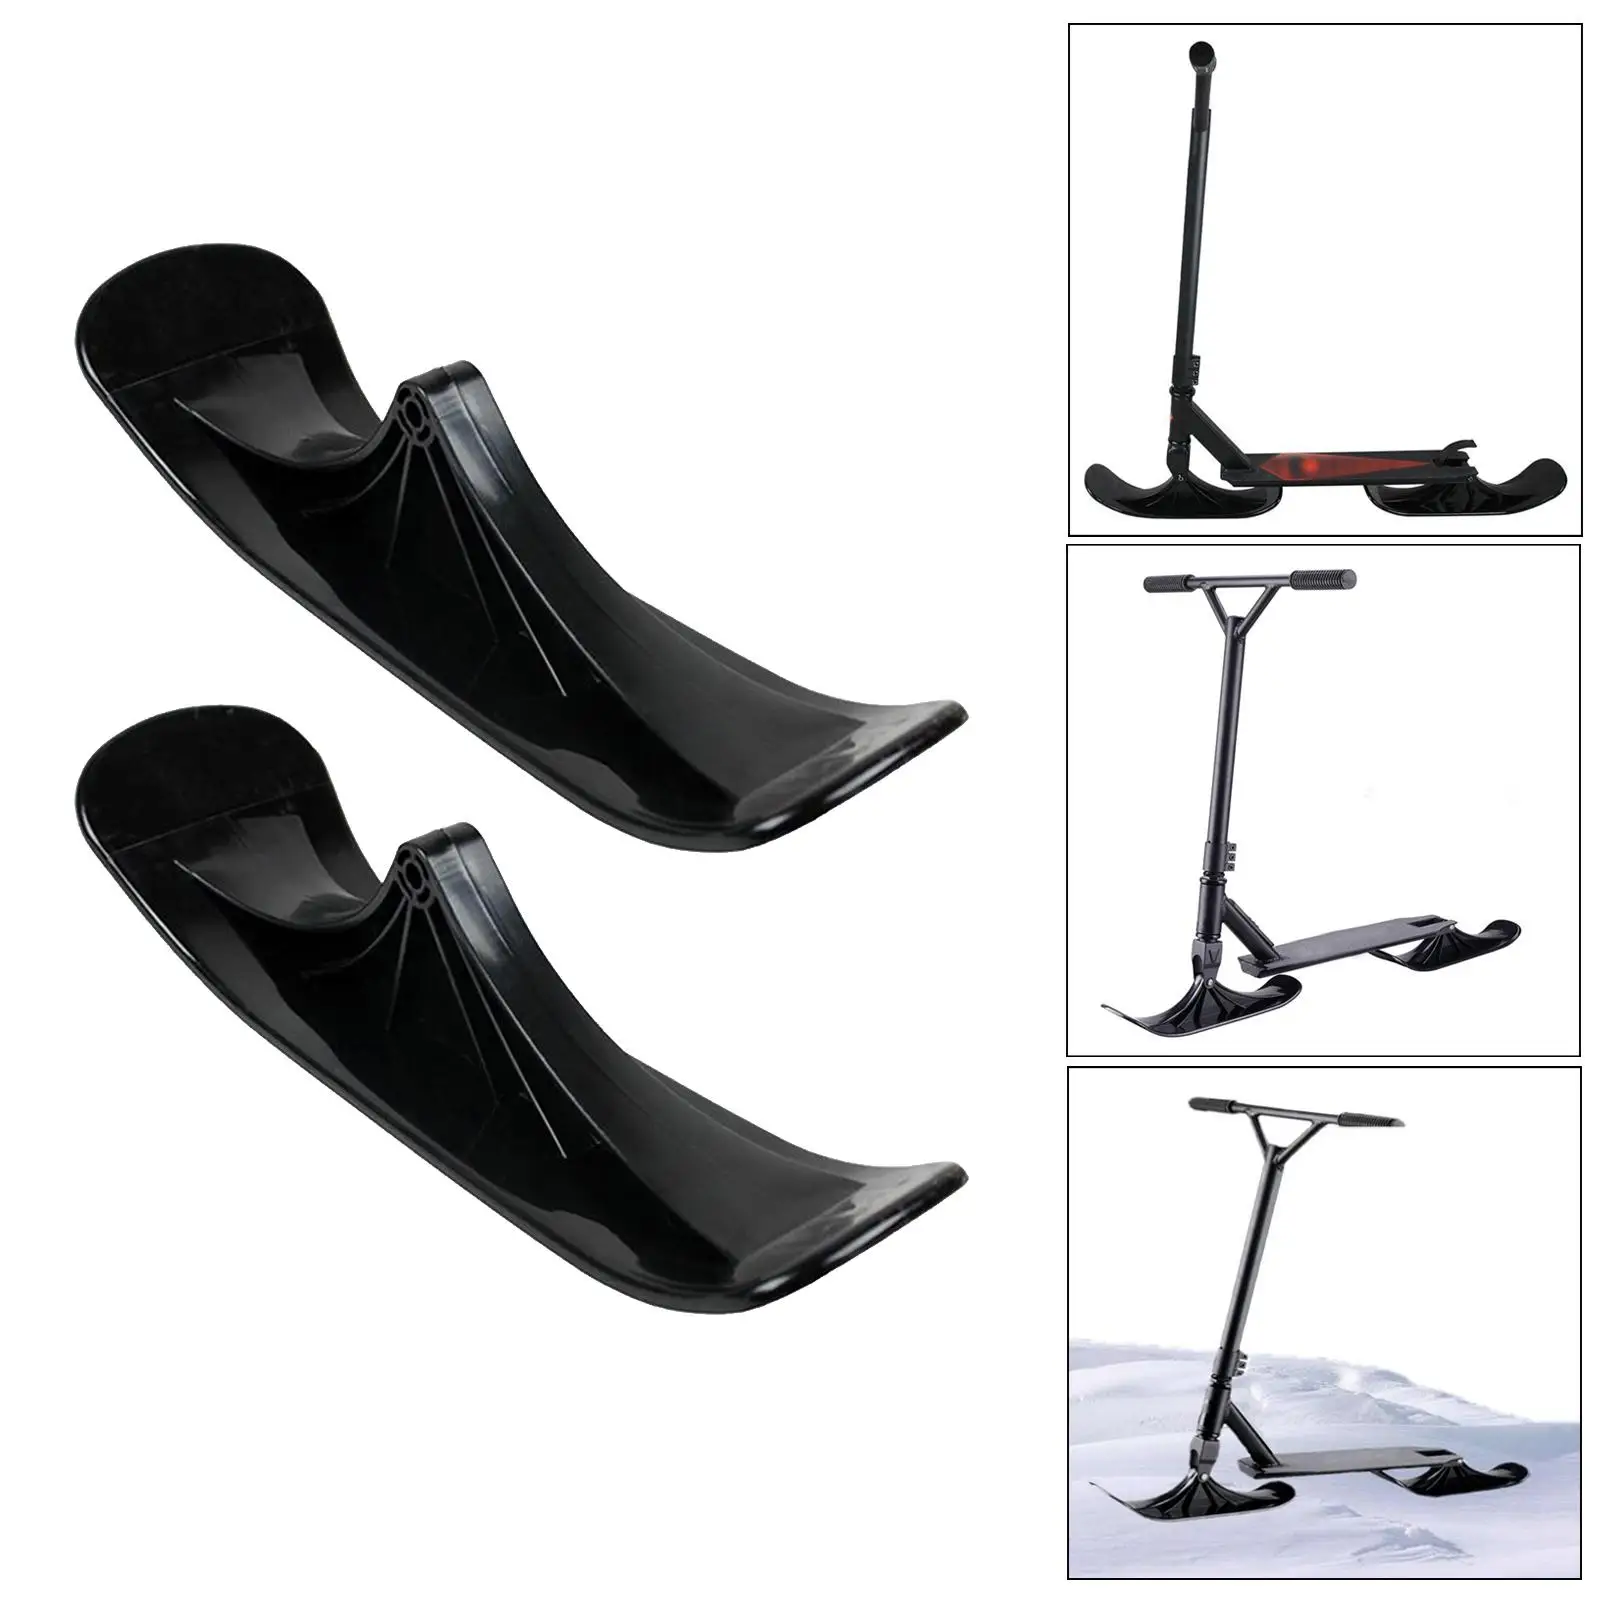 2 Scooter Sled, Ski Scooter Sleds, Snowboard Sled Outdoor Sports Winter